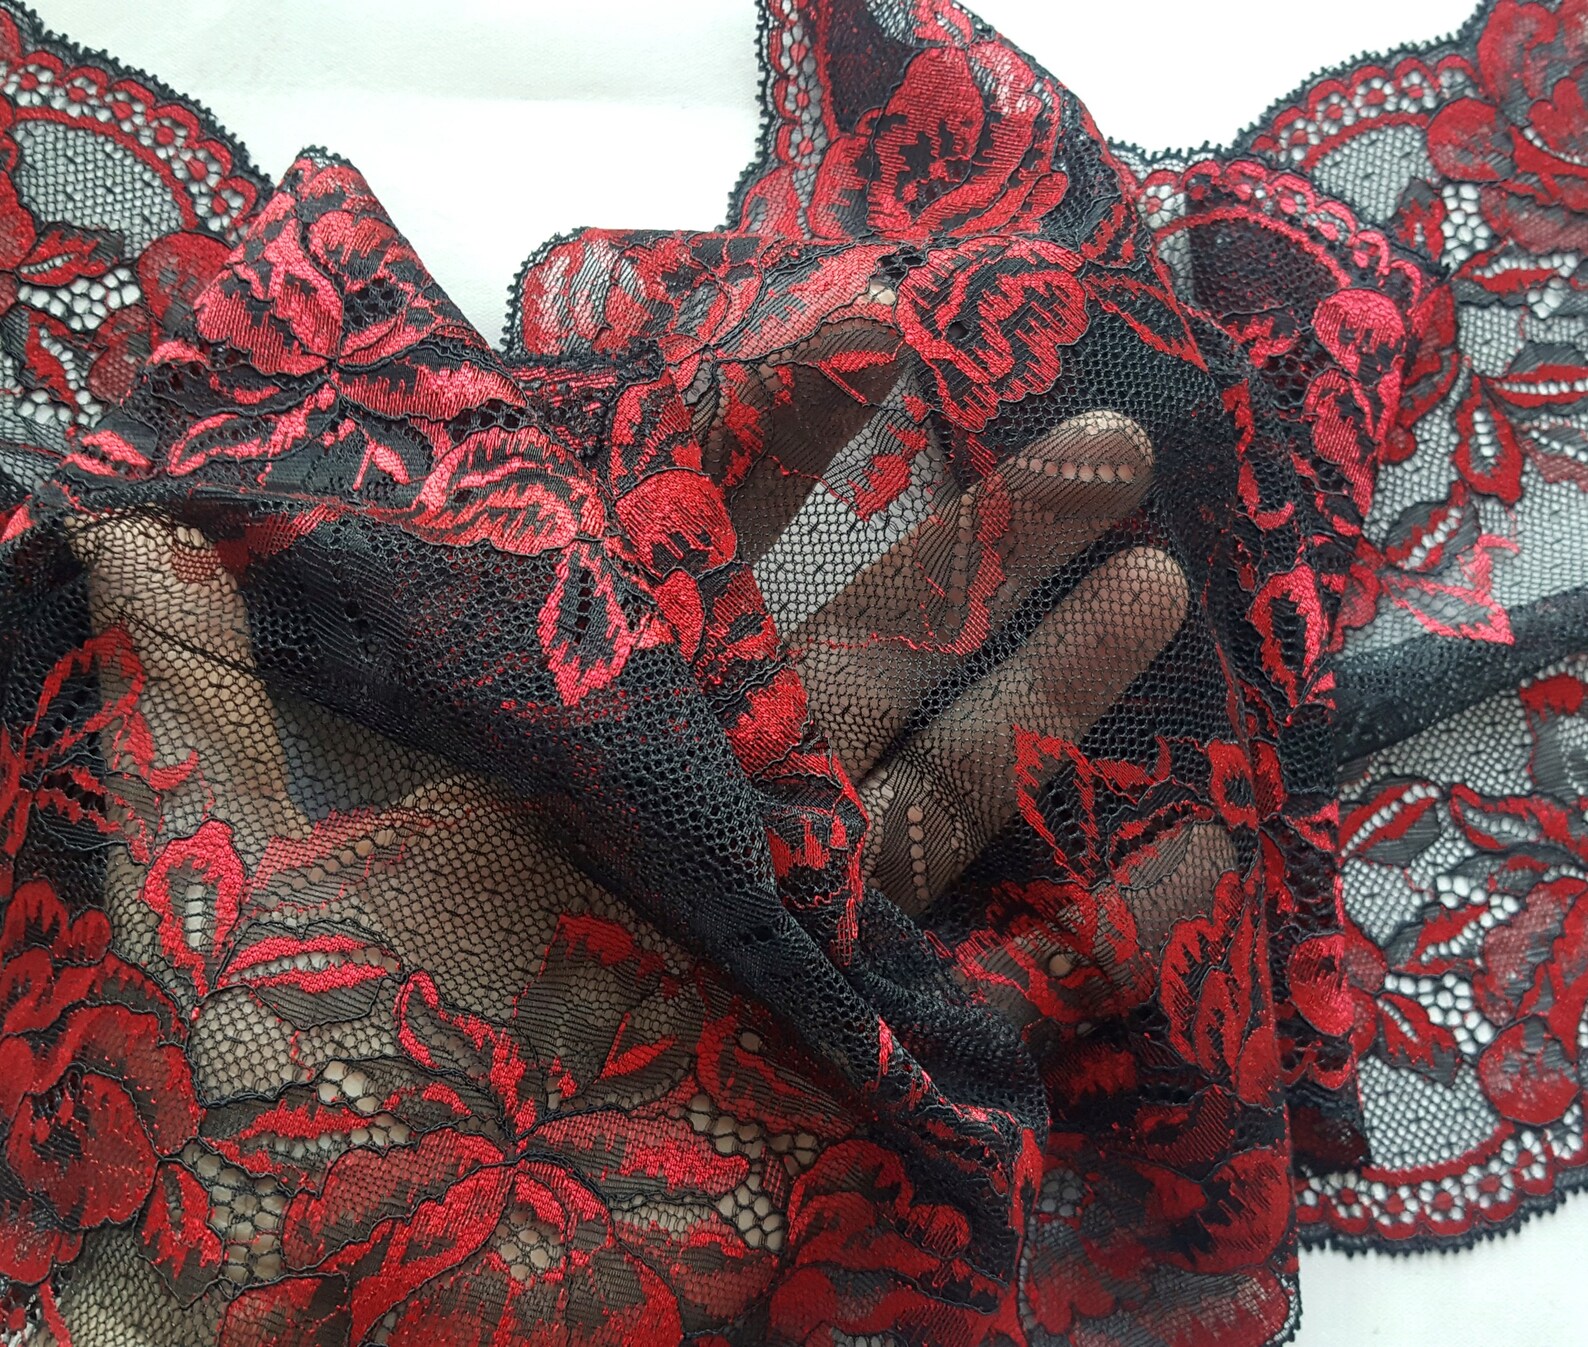 Black Red Stretch Lace Trim Elastic Wide Lace Fabric width | Etsy